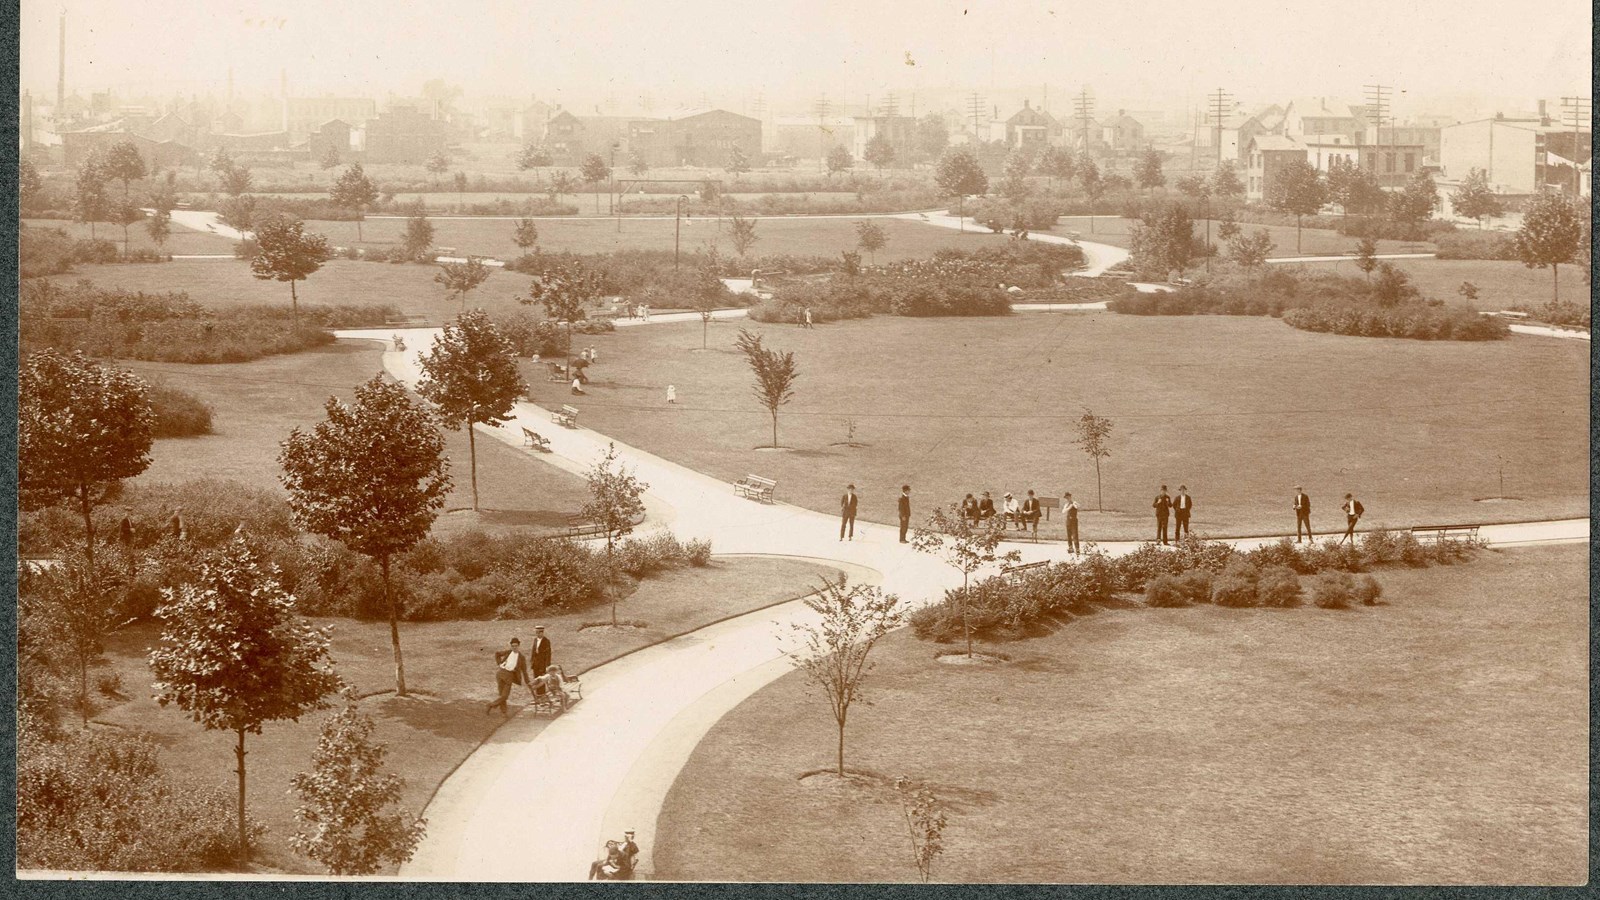 Black and white of park with curving path through grassy space with people walking on it and trees